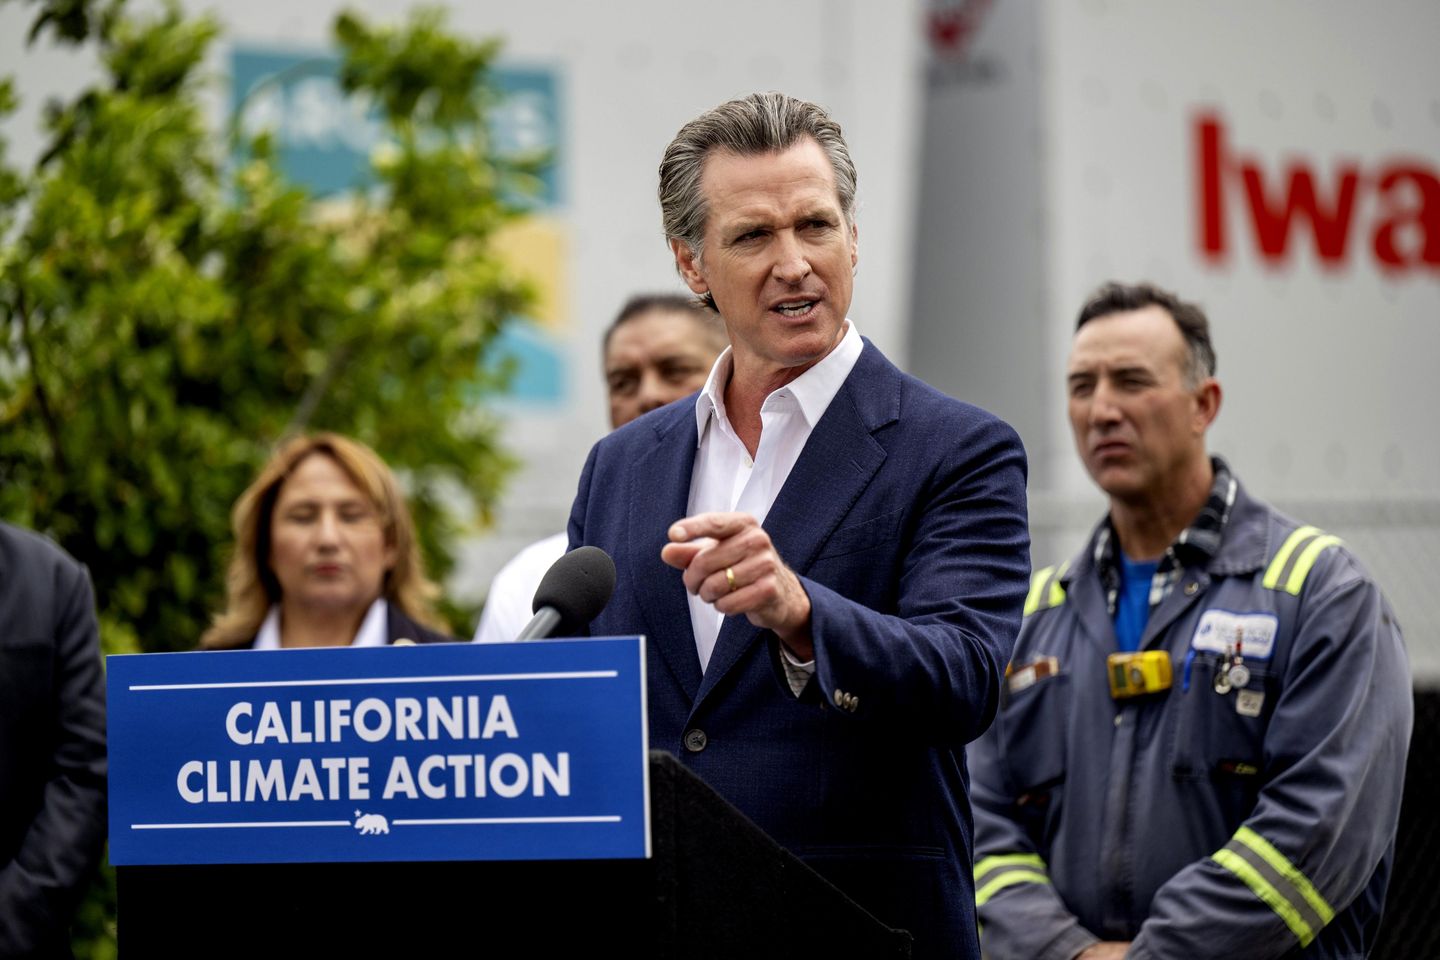 Gov. Gavin Newsom seeks to speed up water, clean energy projects delayed by lawsuits, permits